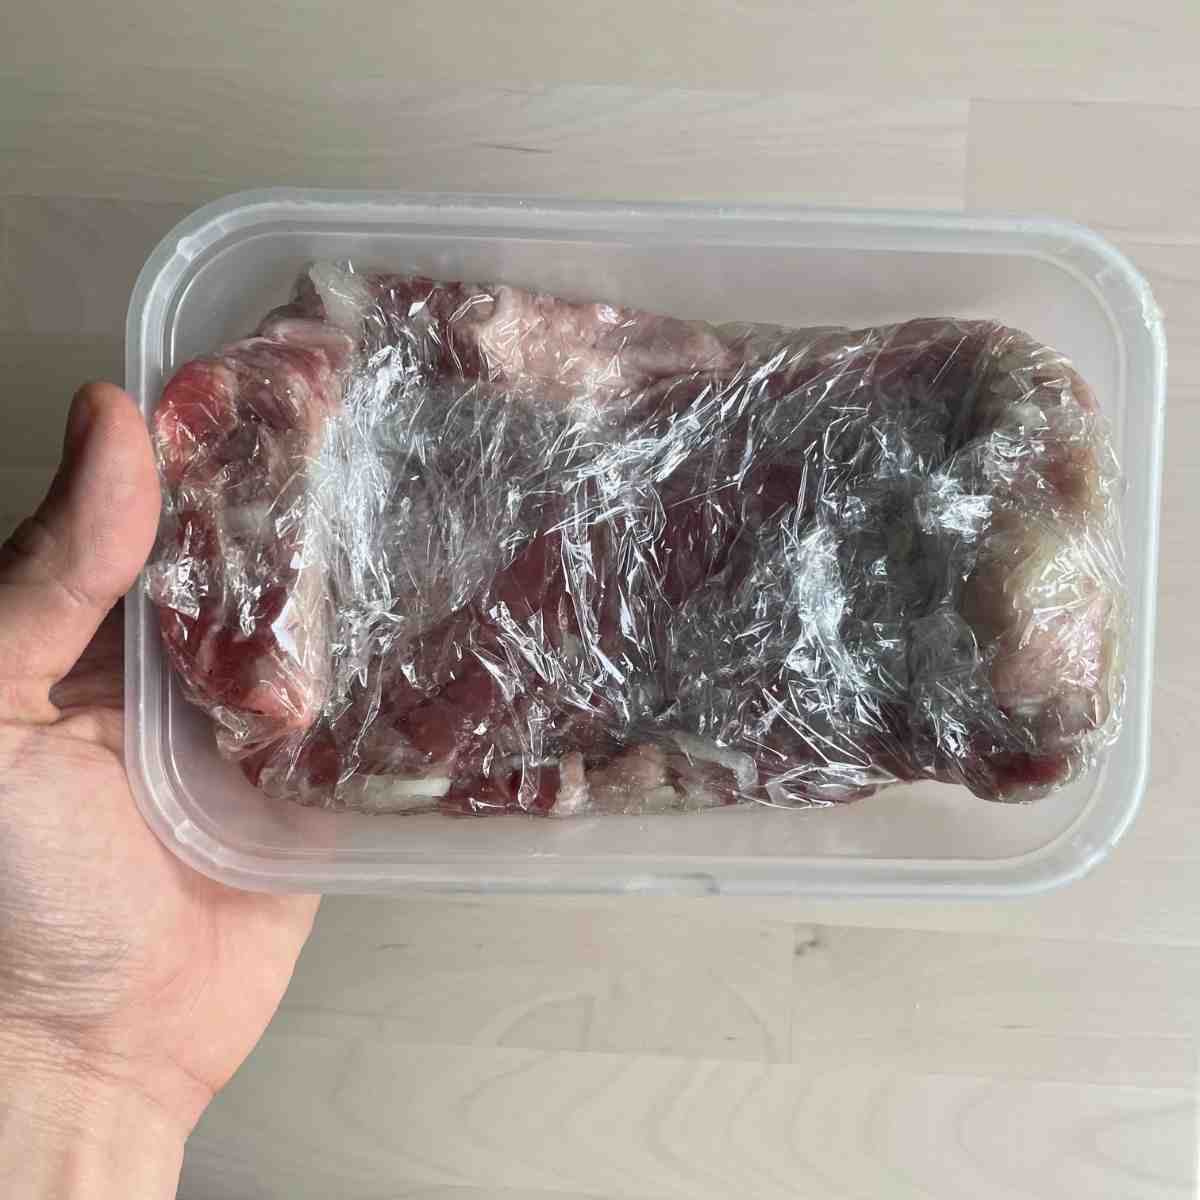 Keep marinated beef in cling film